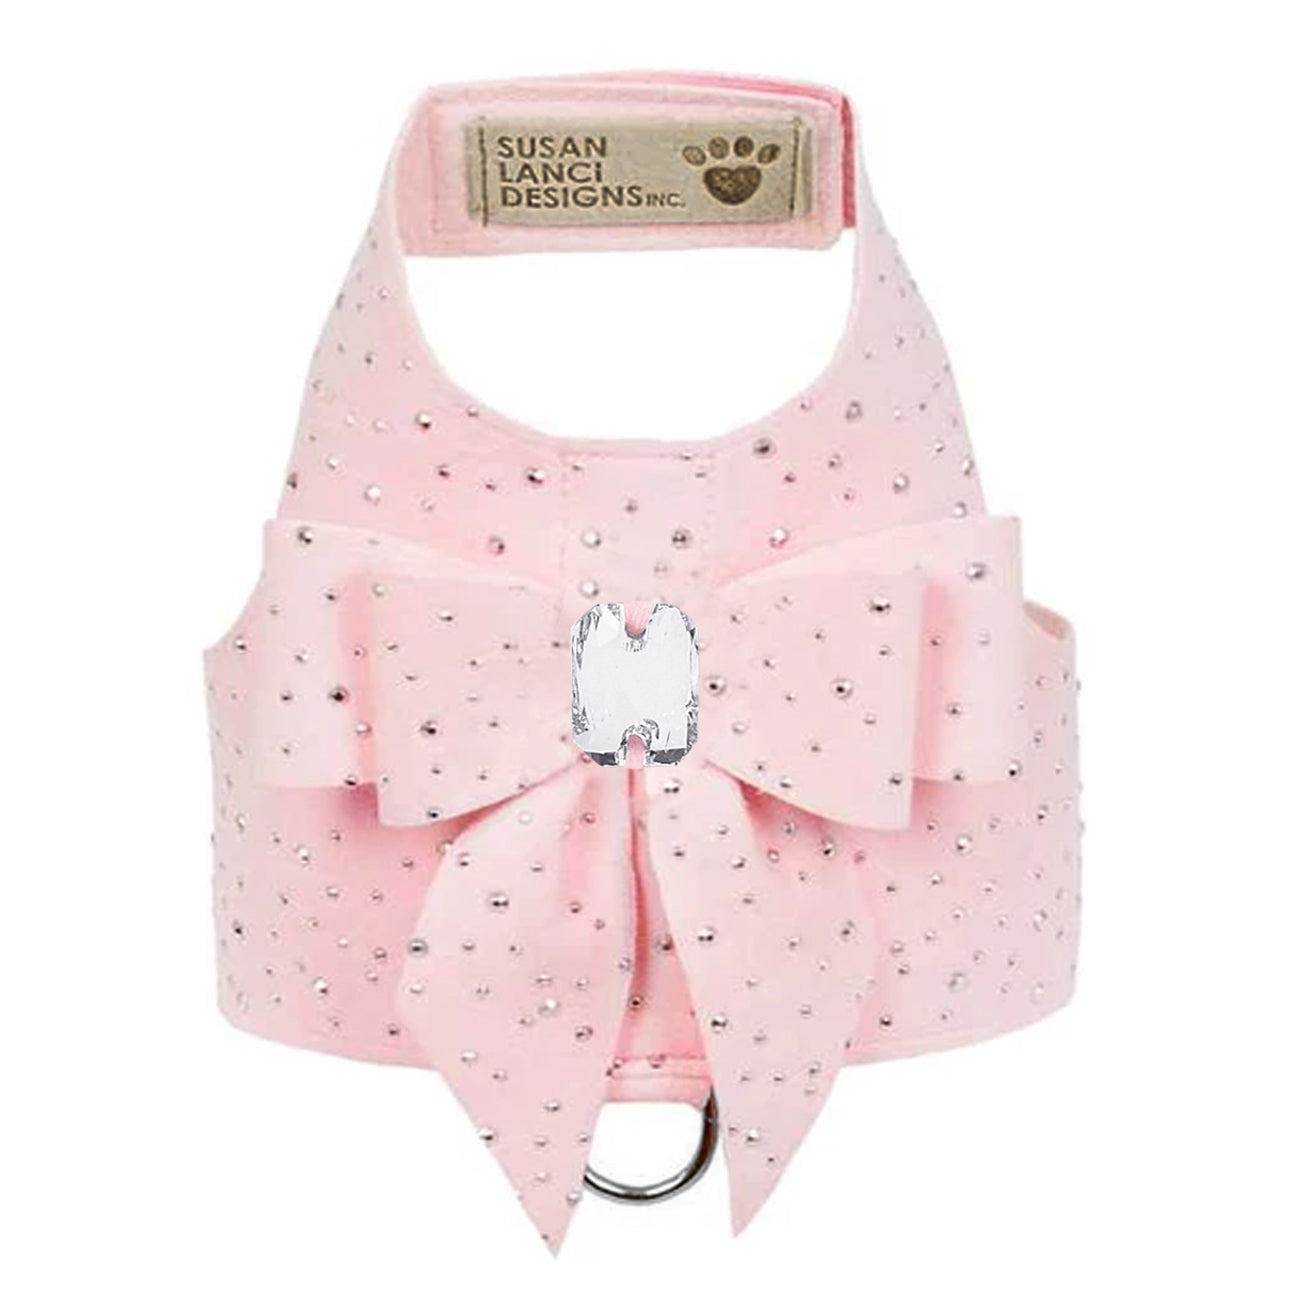 Bailey Stardust Dog Harness: Puppy Pink